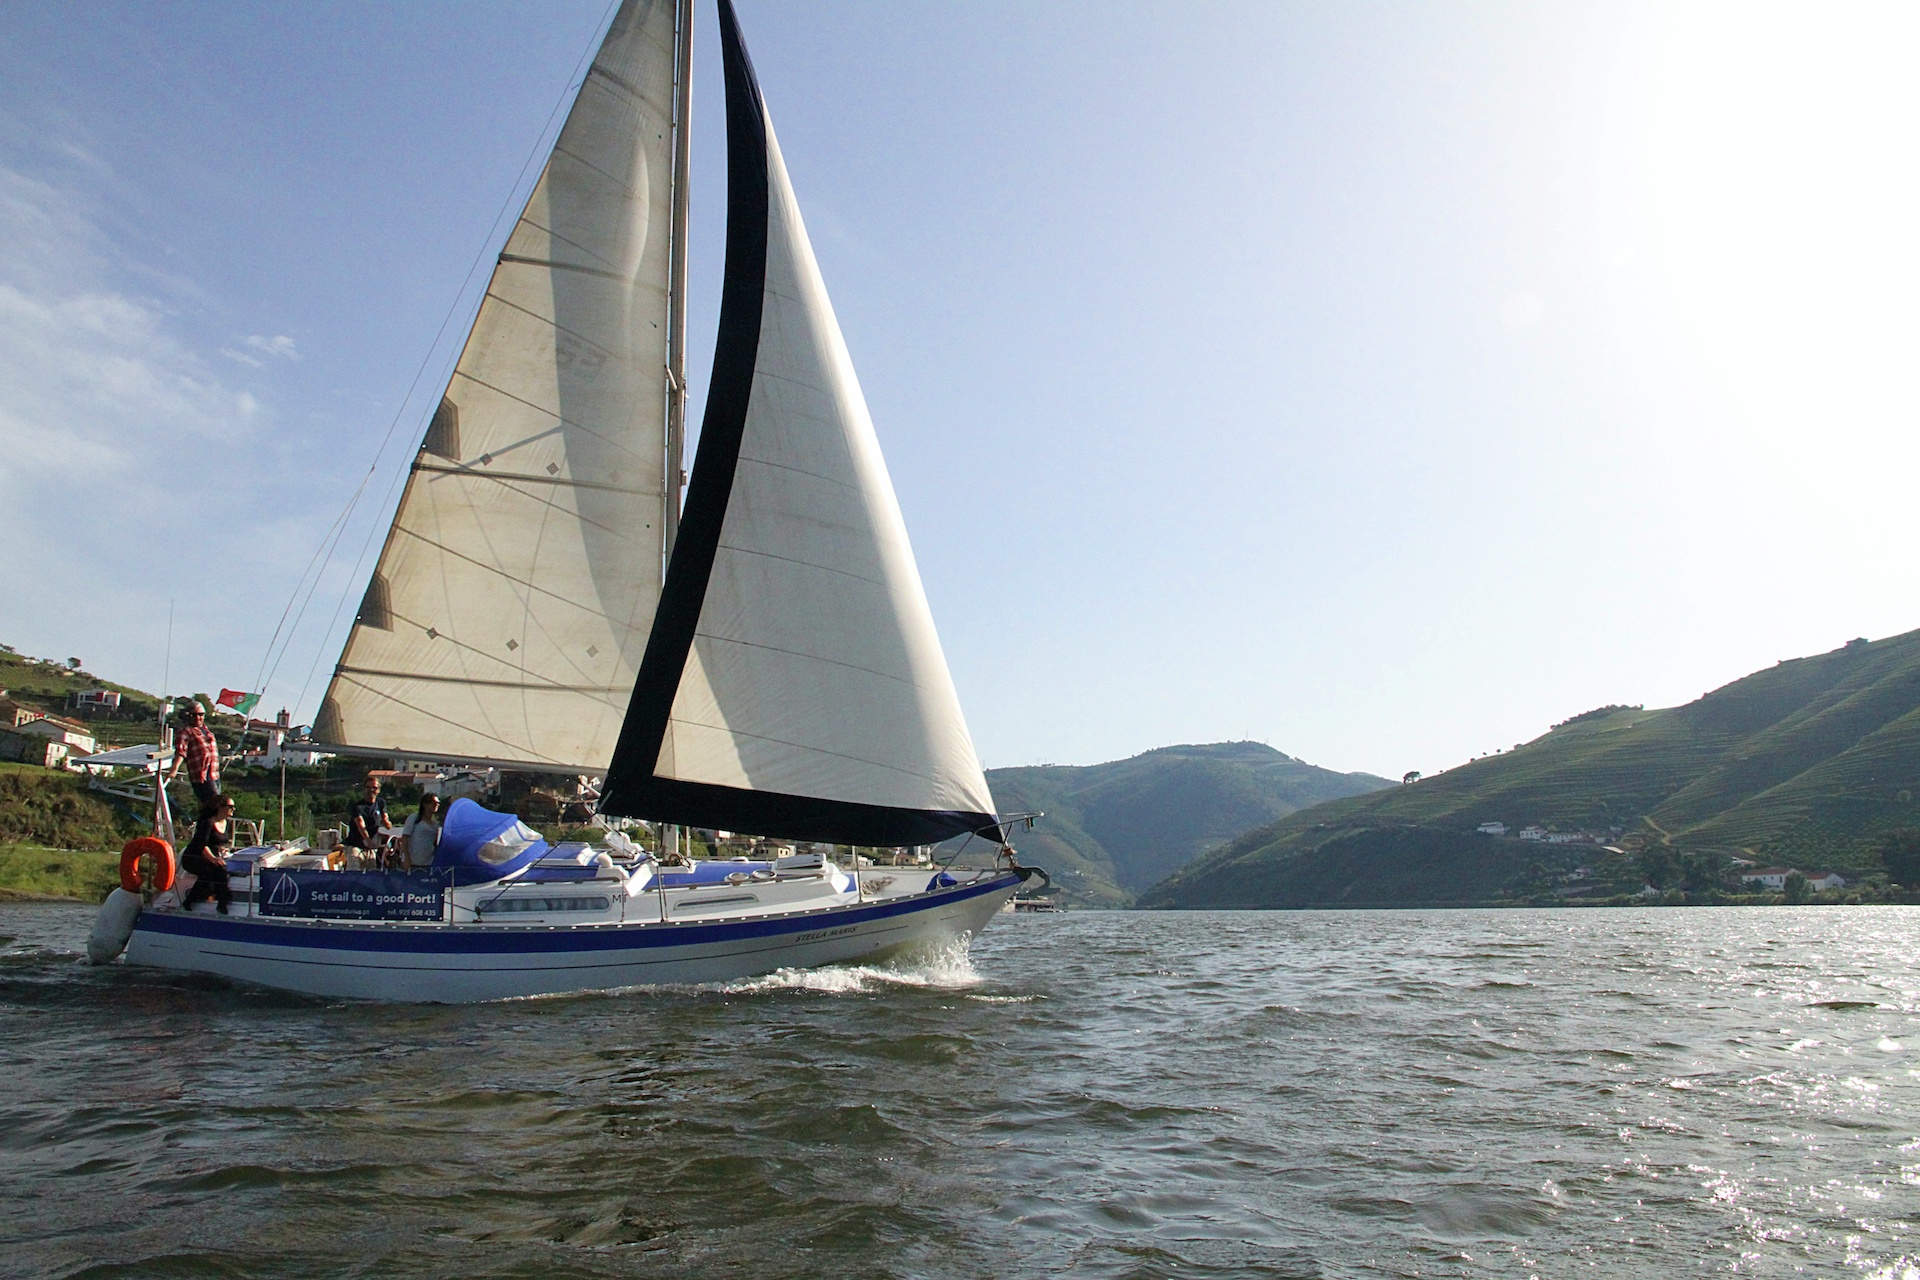 Sailing in the Douro